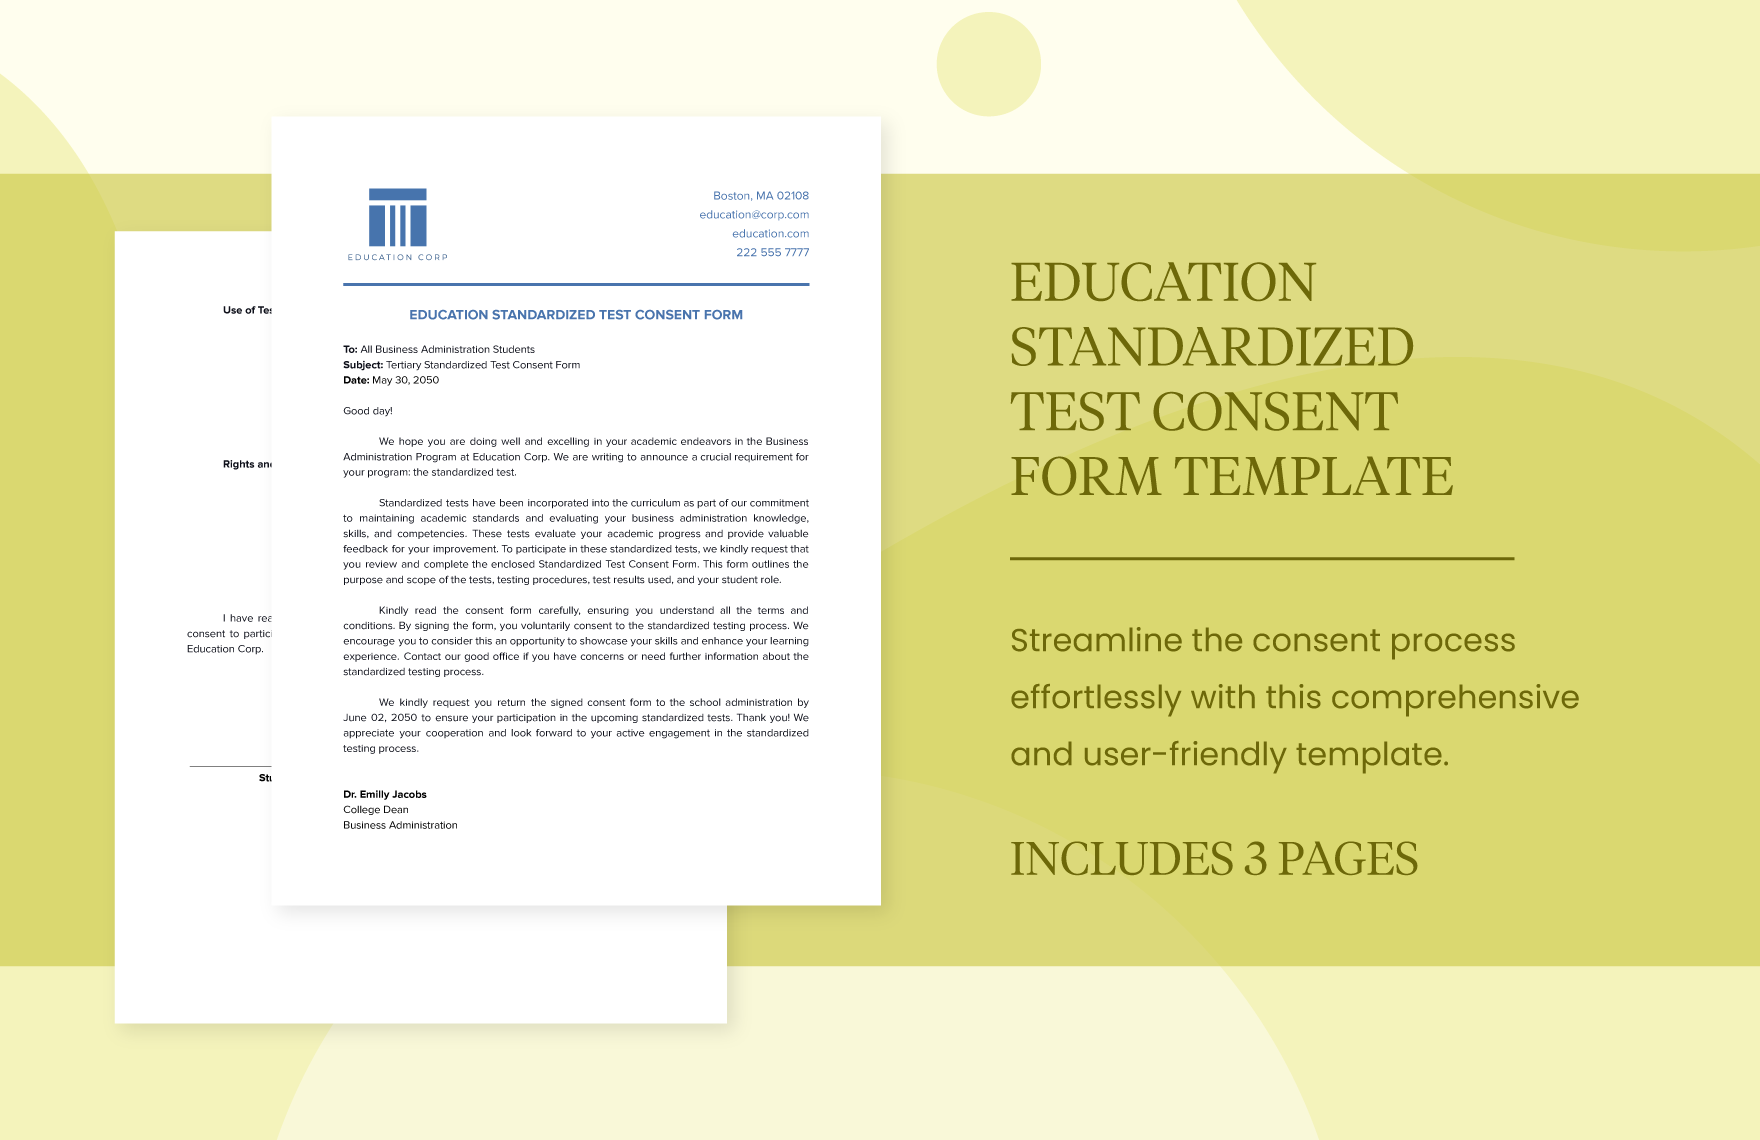 Education Standardized Test Consent Form Template in Word, Google Docs, PDF